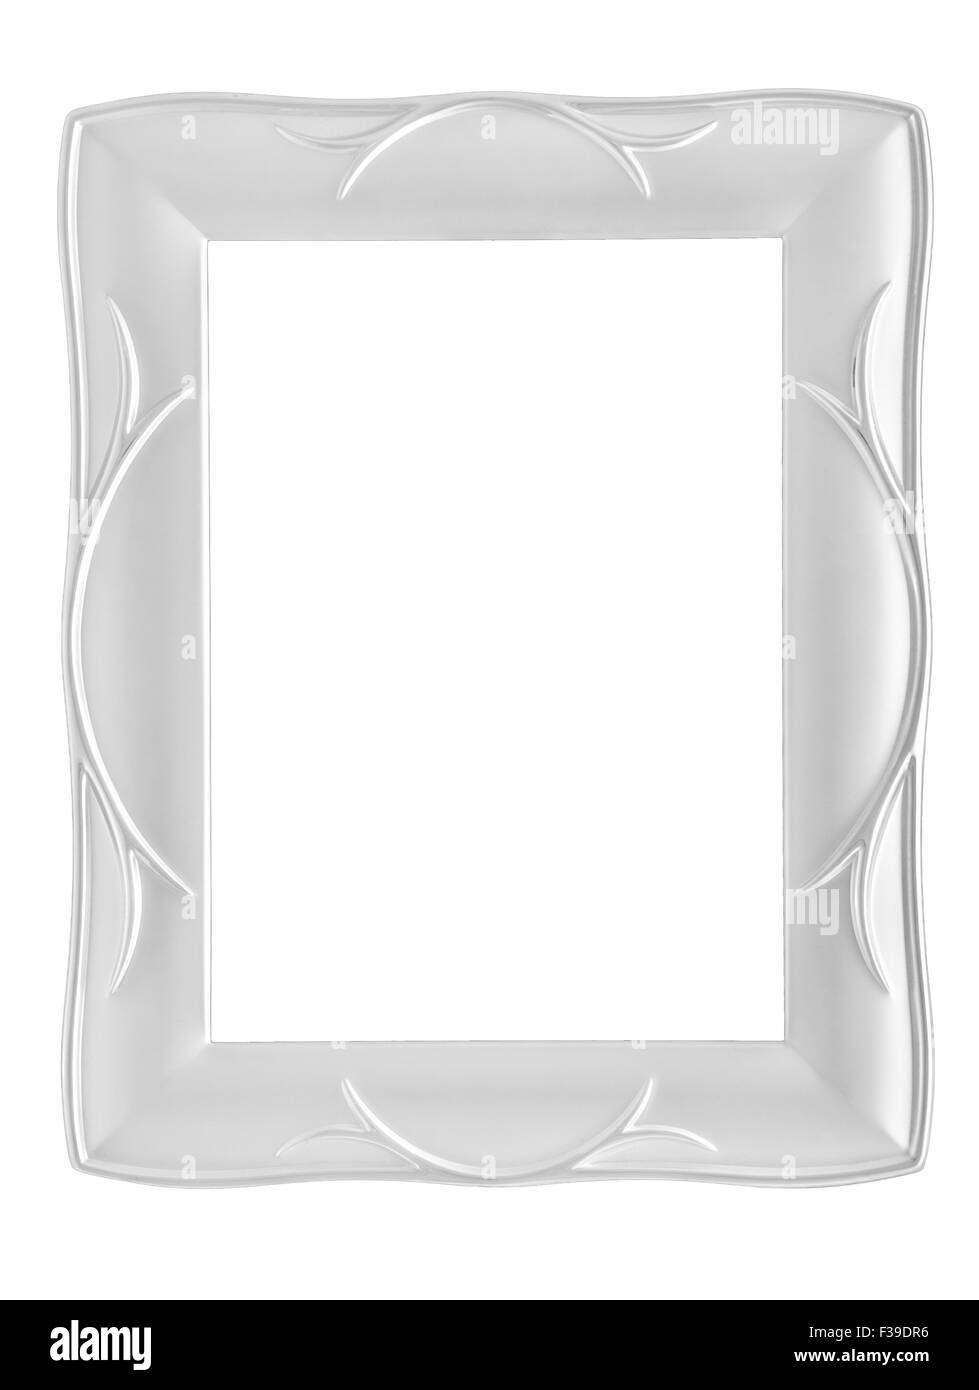 Silver photo frame isolated on a white background Stock Photo